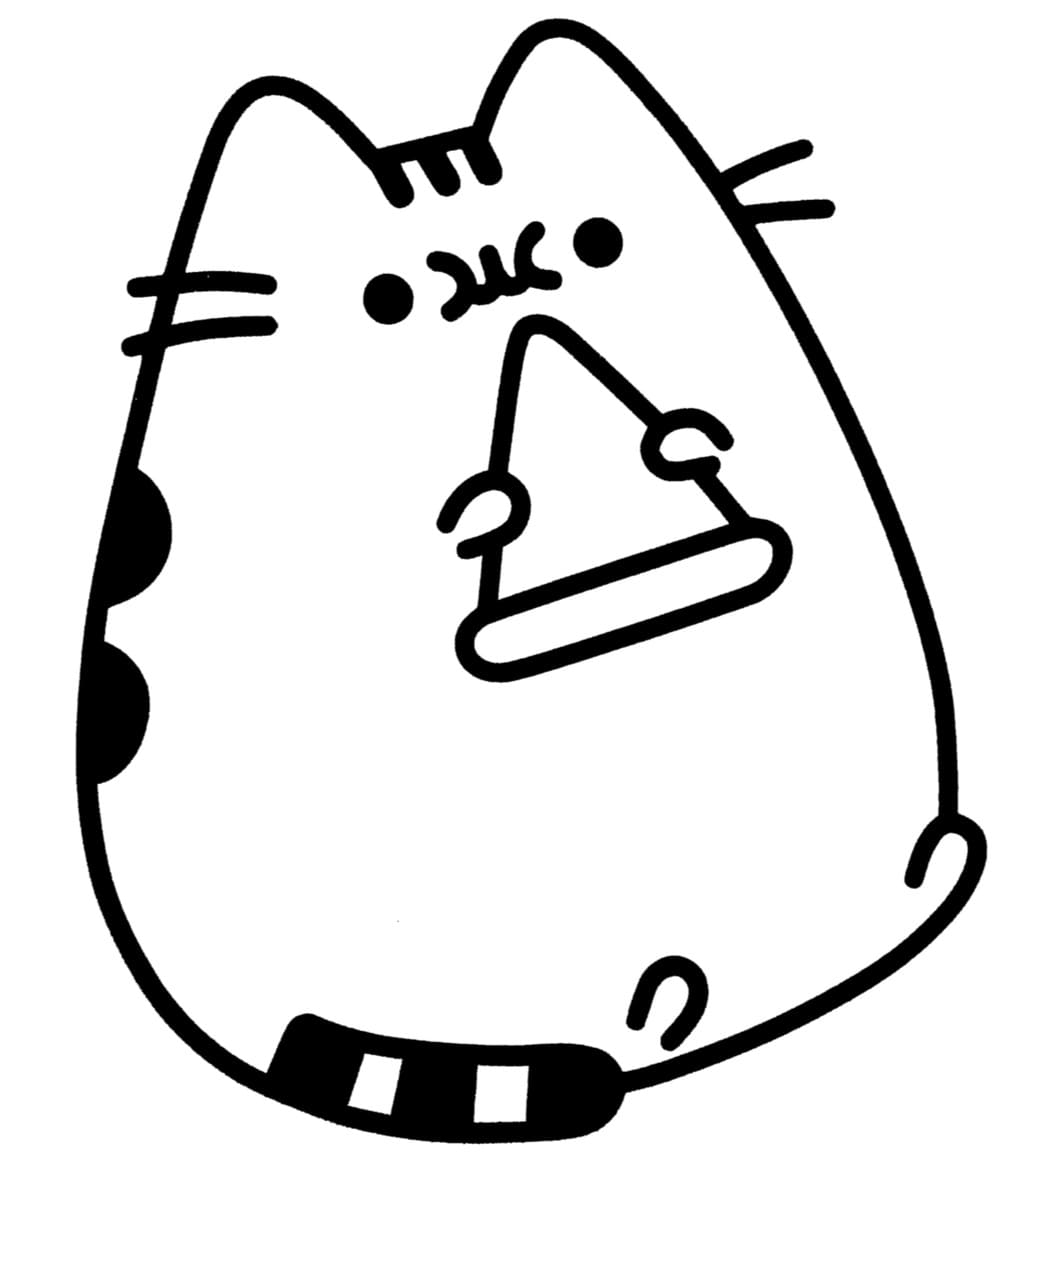 Cat Pusheen 2021 Coloring Pages - Coloring Pages - Coloring Pages For